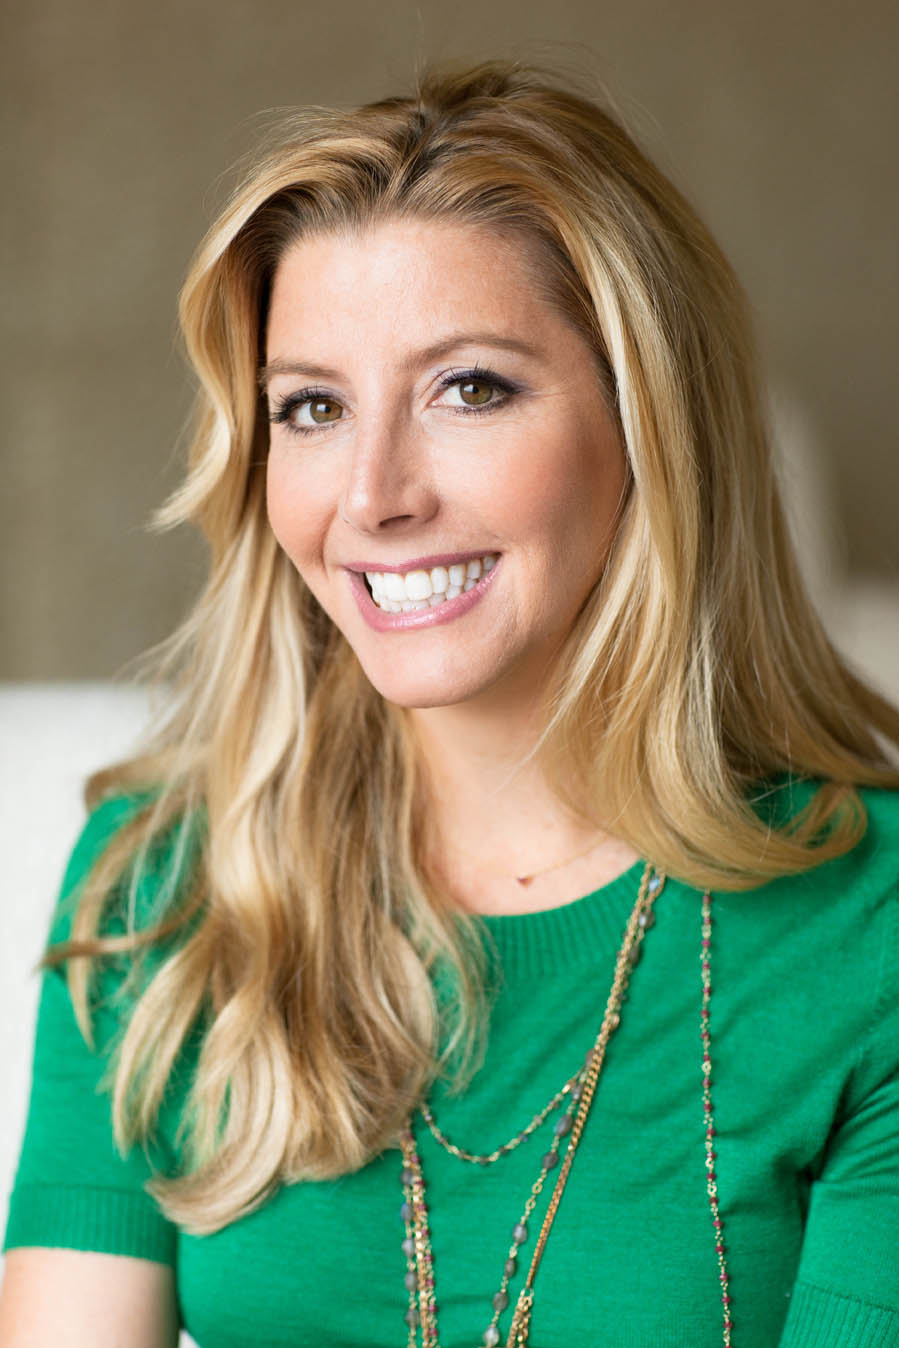 World’s youngest self made woman billionaire Sara Blakely